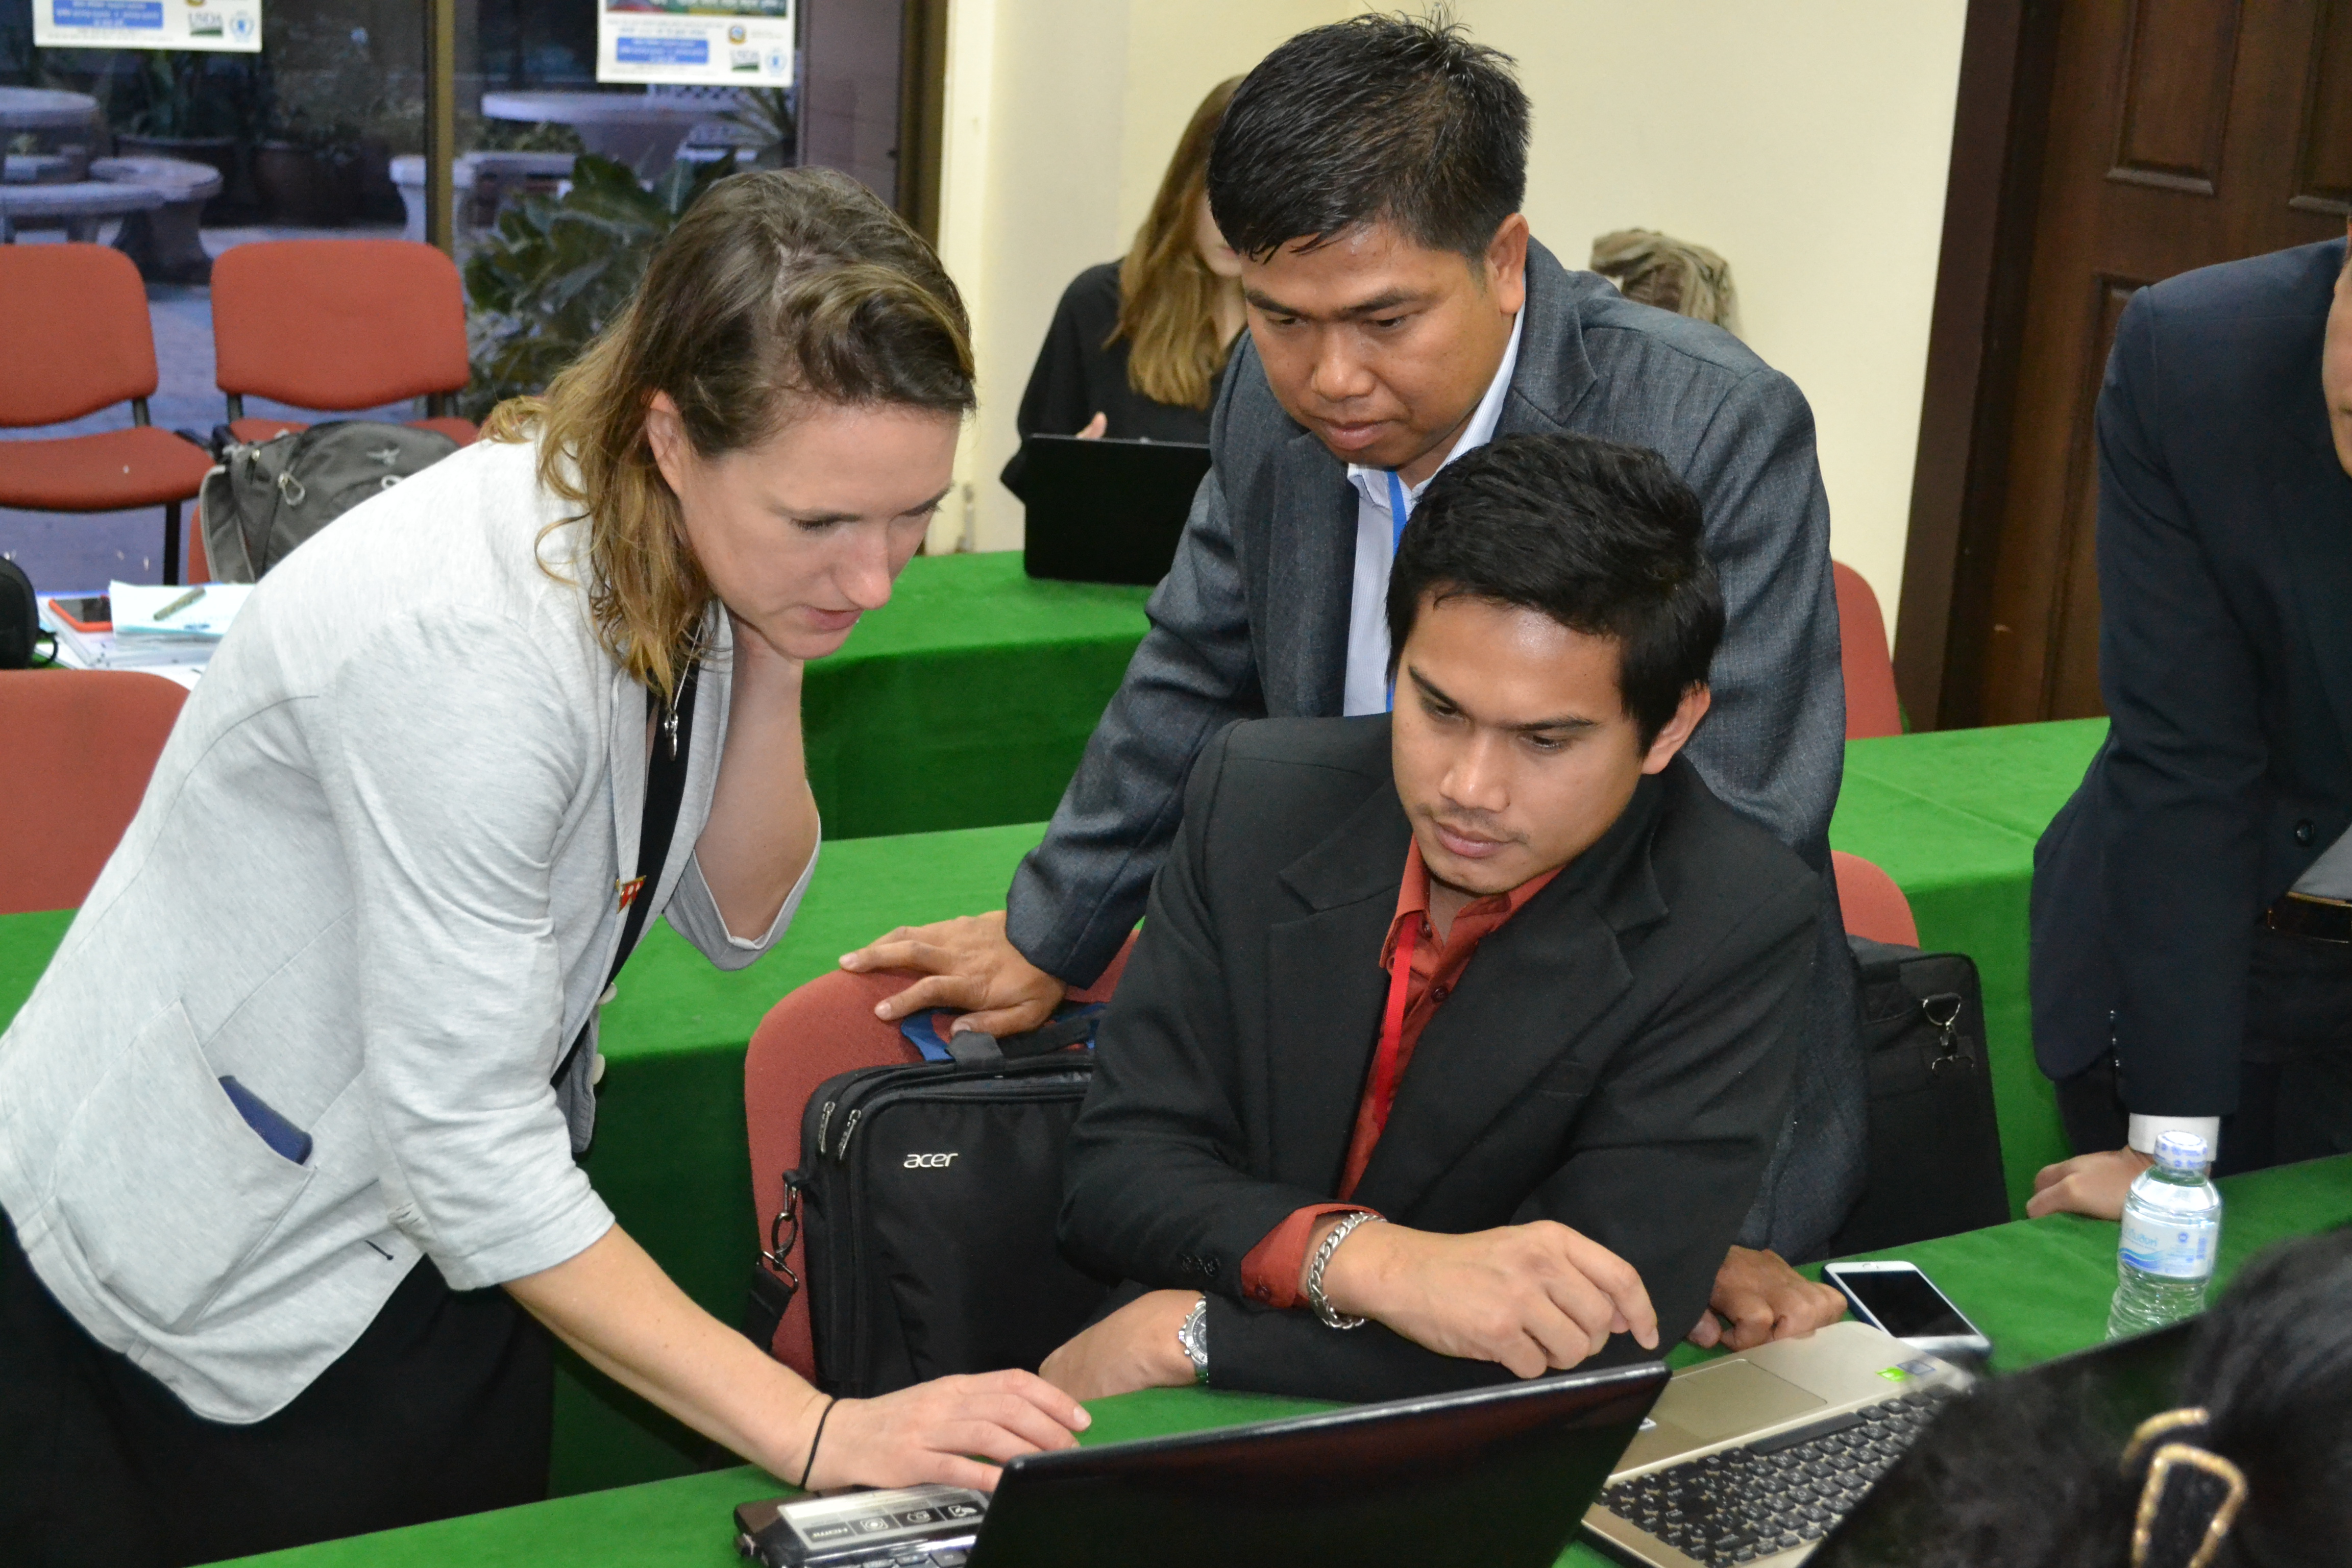 Noy Sidavong and Sitthideth Saengsouly discussing Laos's action plan with Imperial College's Dr Laura Appleby